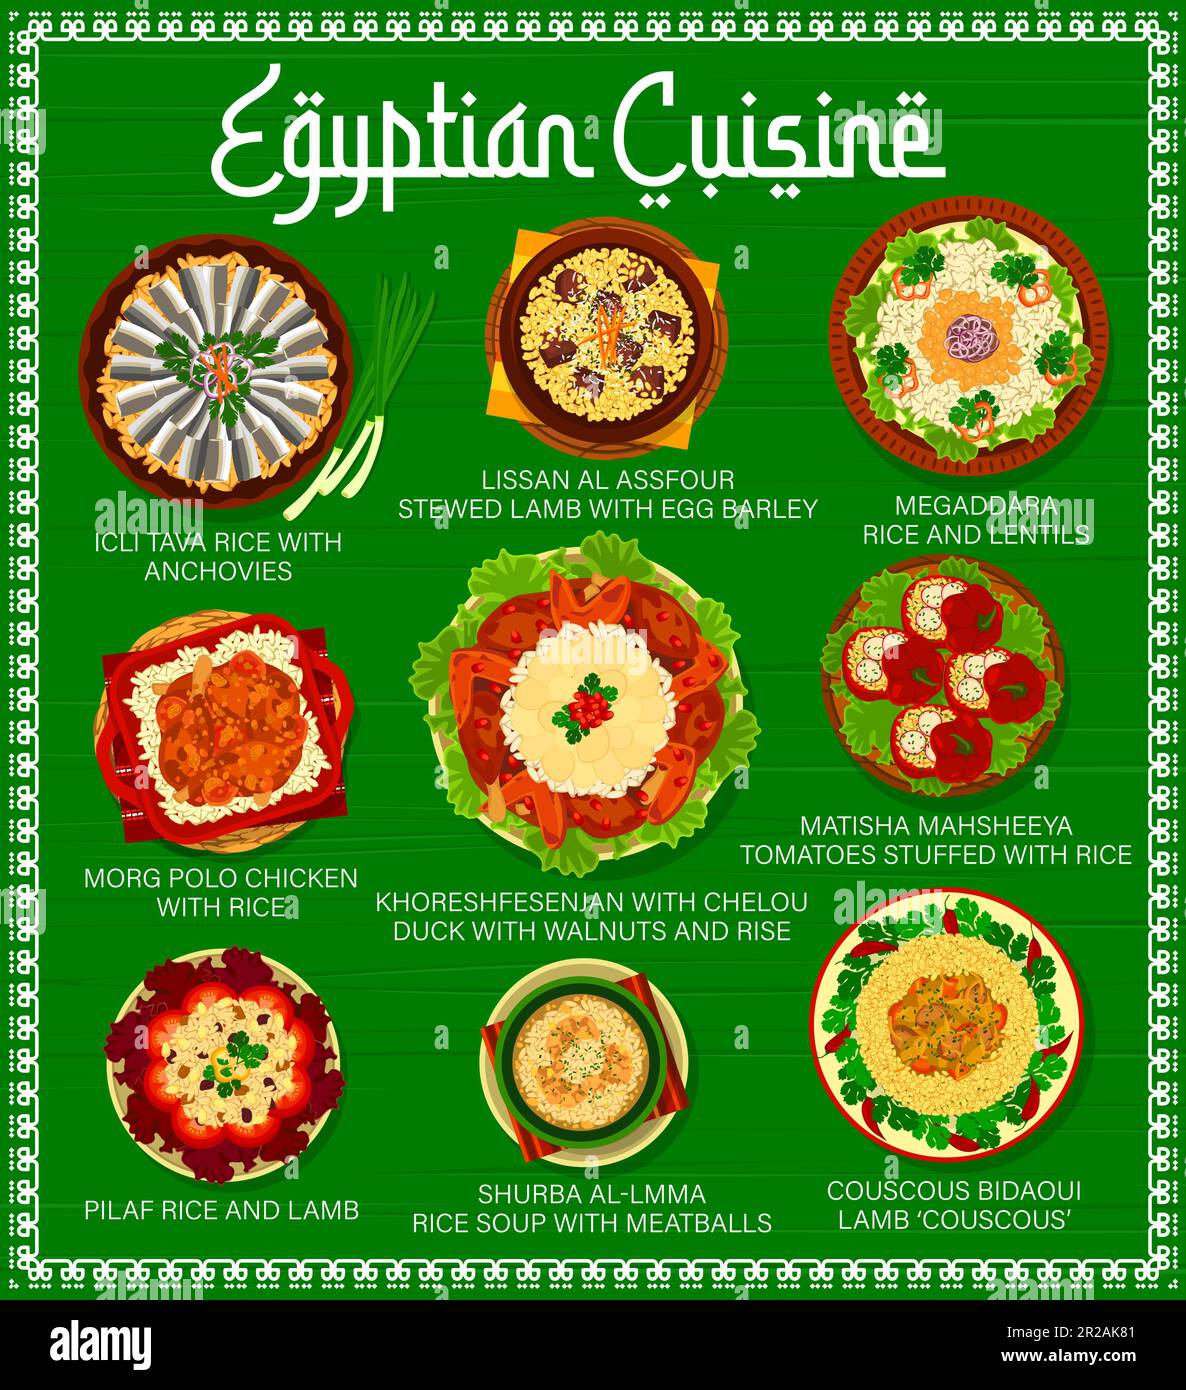 Egyptian cuisine menu, food dishes and meals, vector restaurant lunch and dinner. Egyptian cuisine traditional couscous with lamb, icli tava rice with anchovy and lissan al assfour stewed lamb Stock Vector